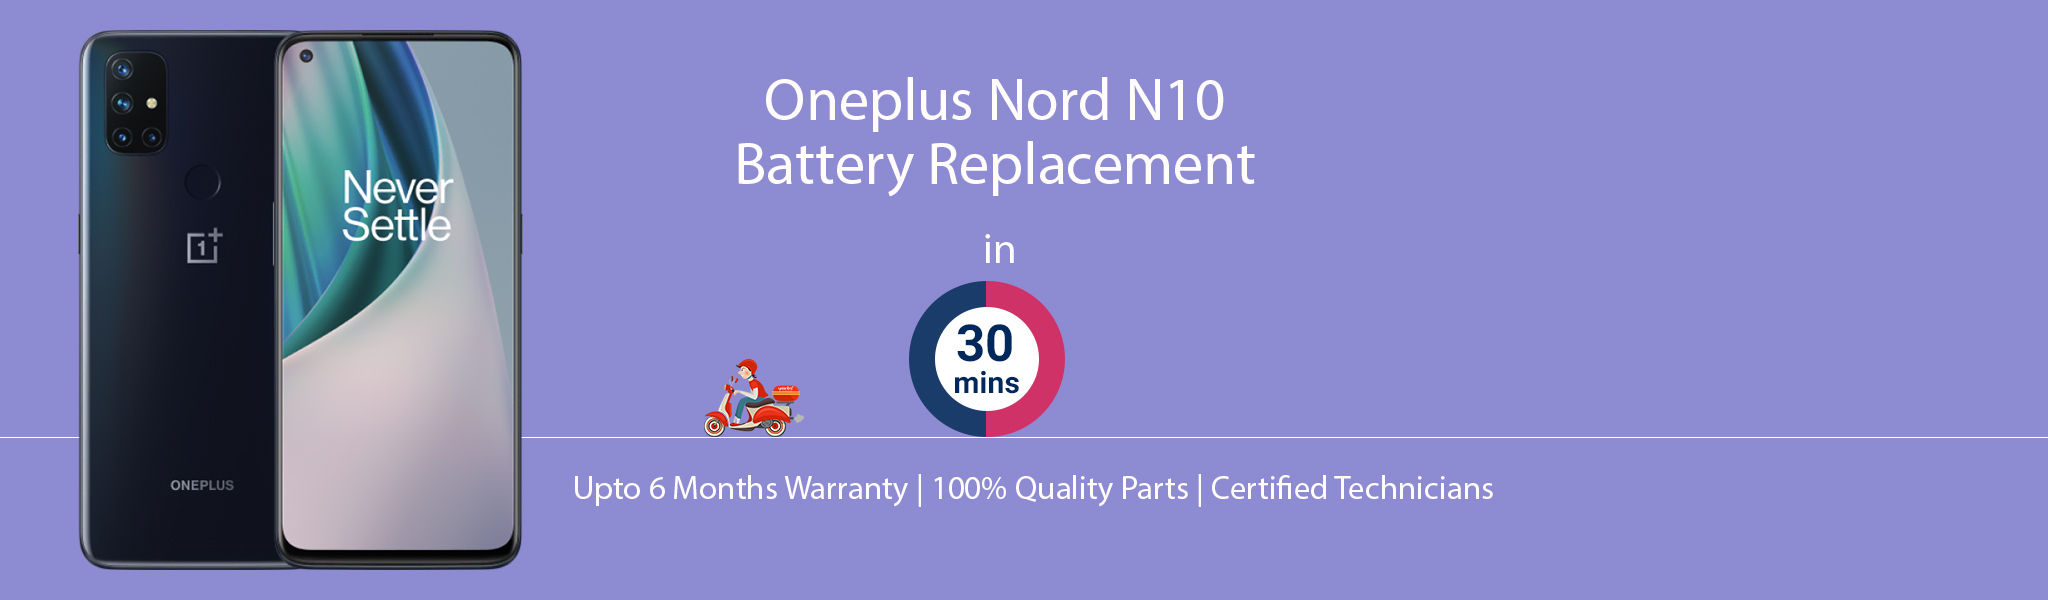 oneplus-nord-battery-replacement.jpg